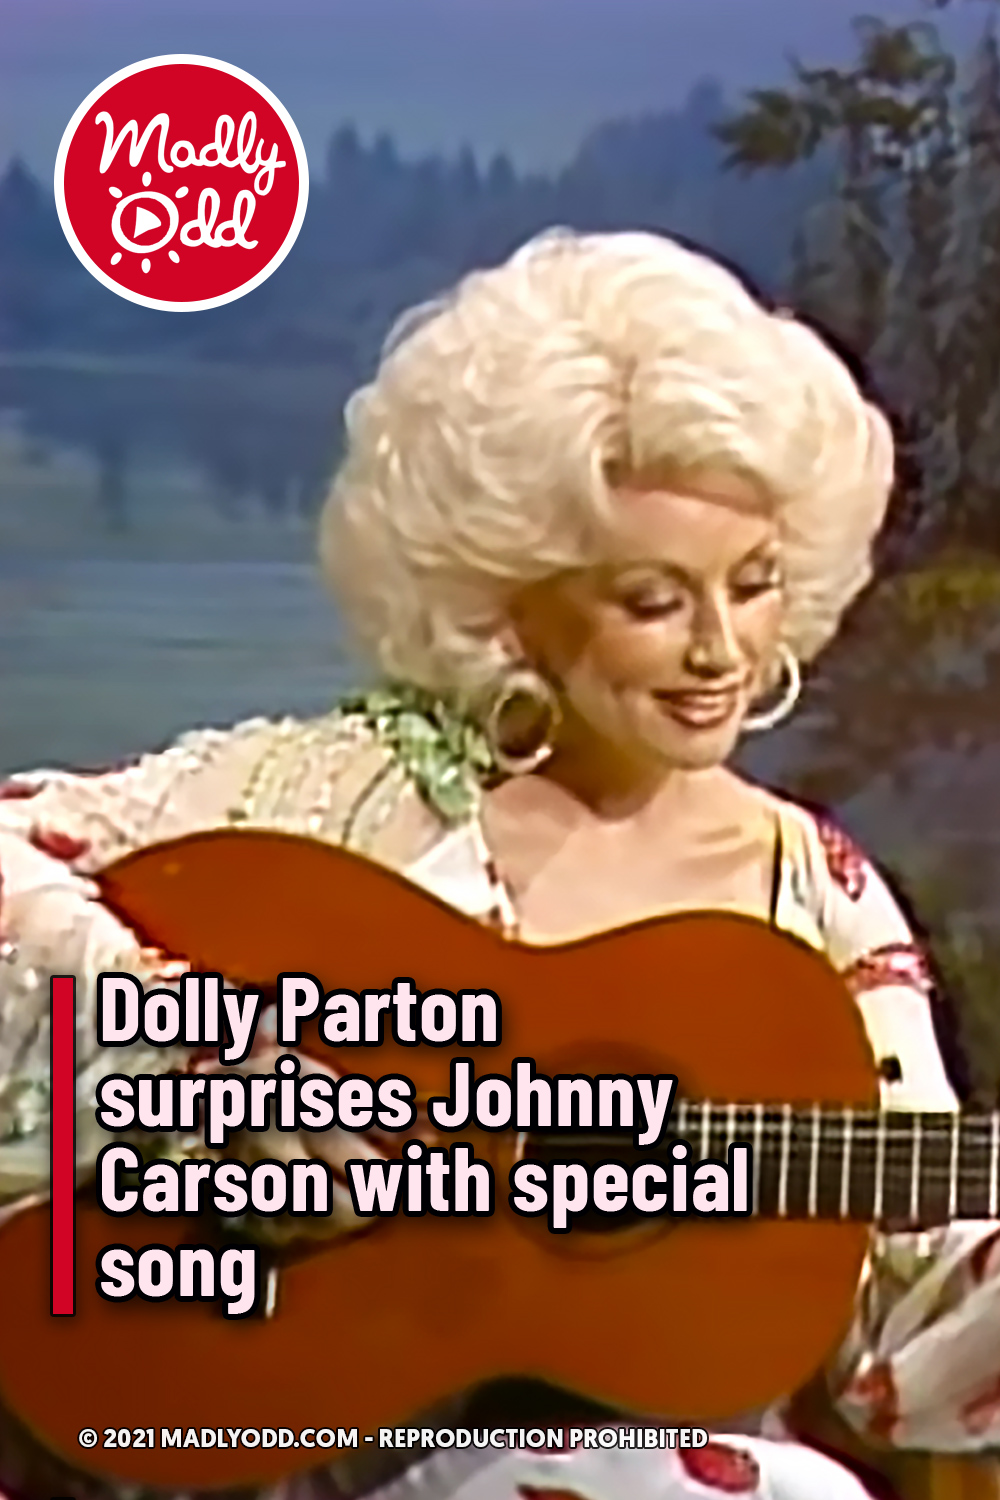 Dolly Parton surprises Johnny Carson with special song